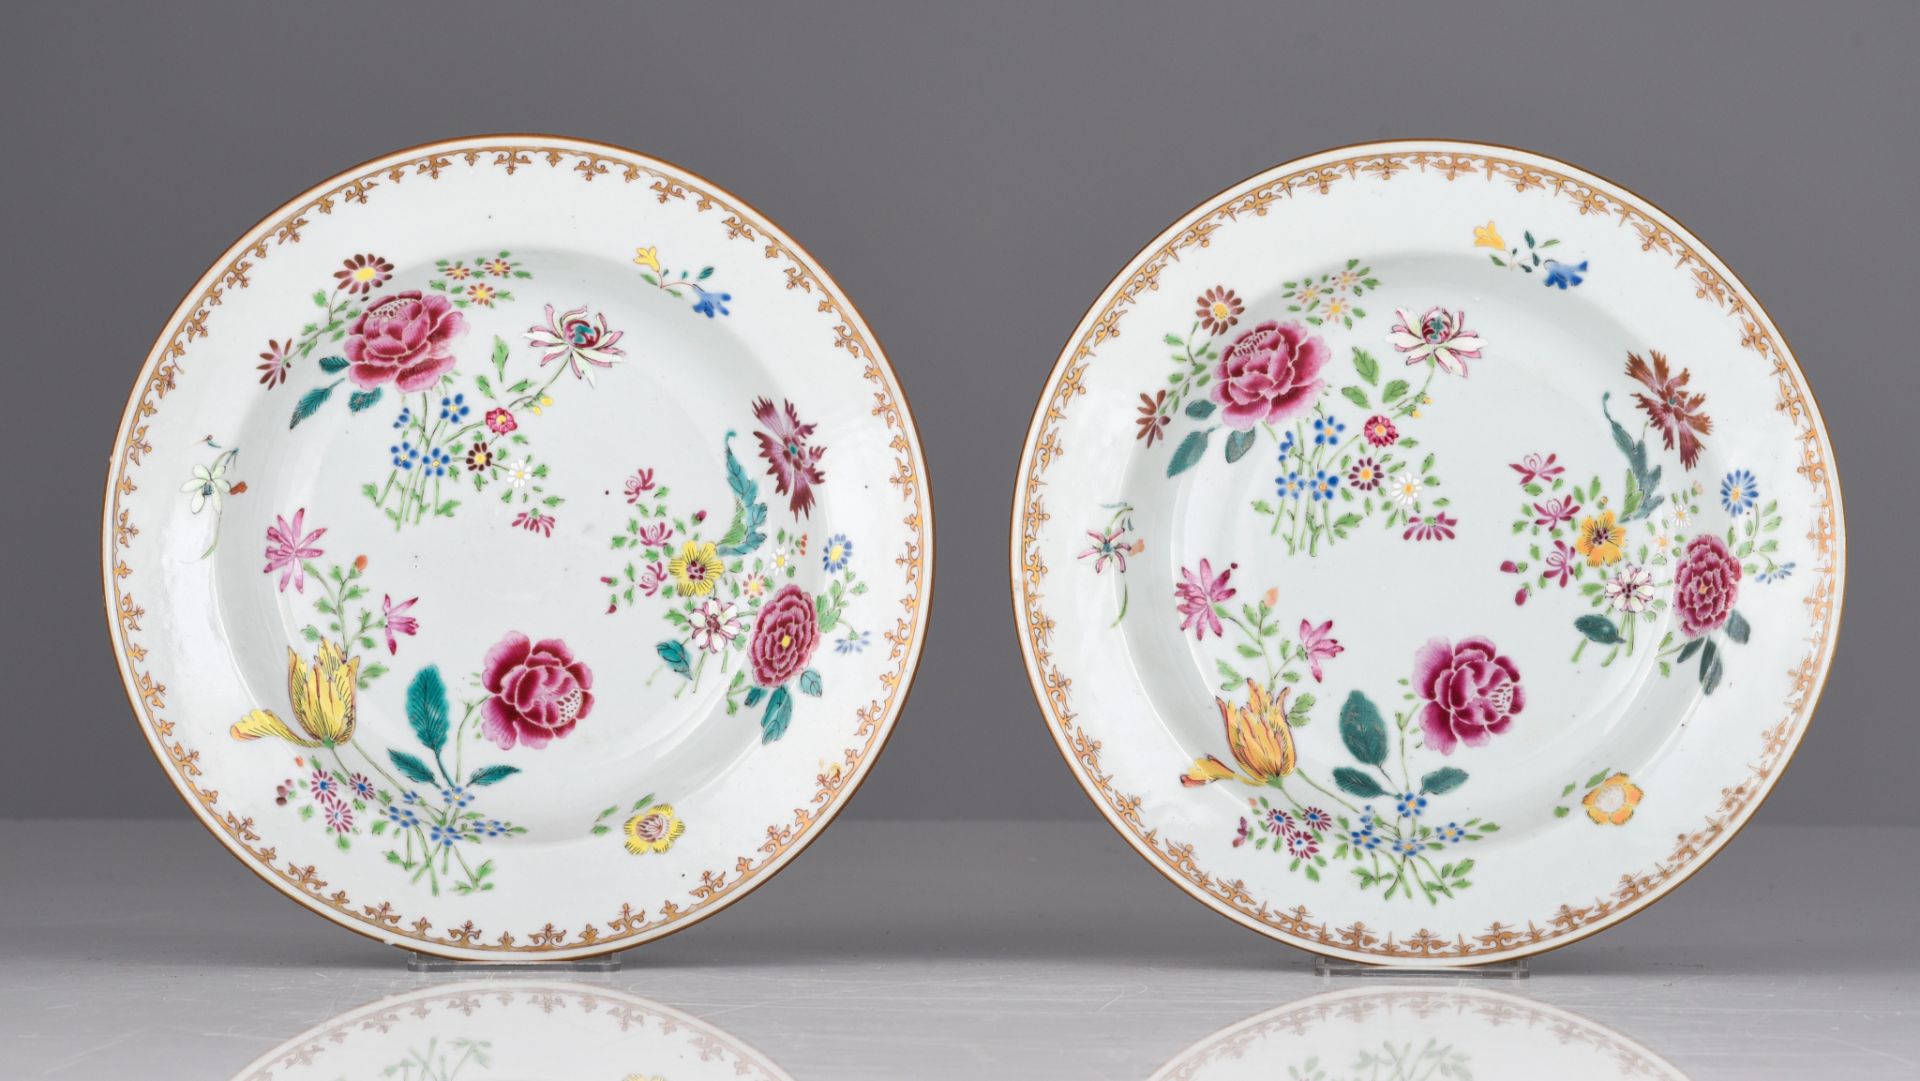 A collection of six Chinese famille rose export porcelain plates, 18thC, ¯ 23,5 cm - Image 3 of 10